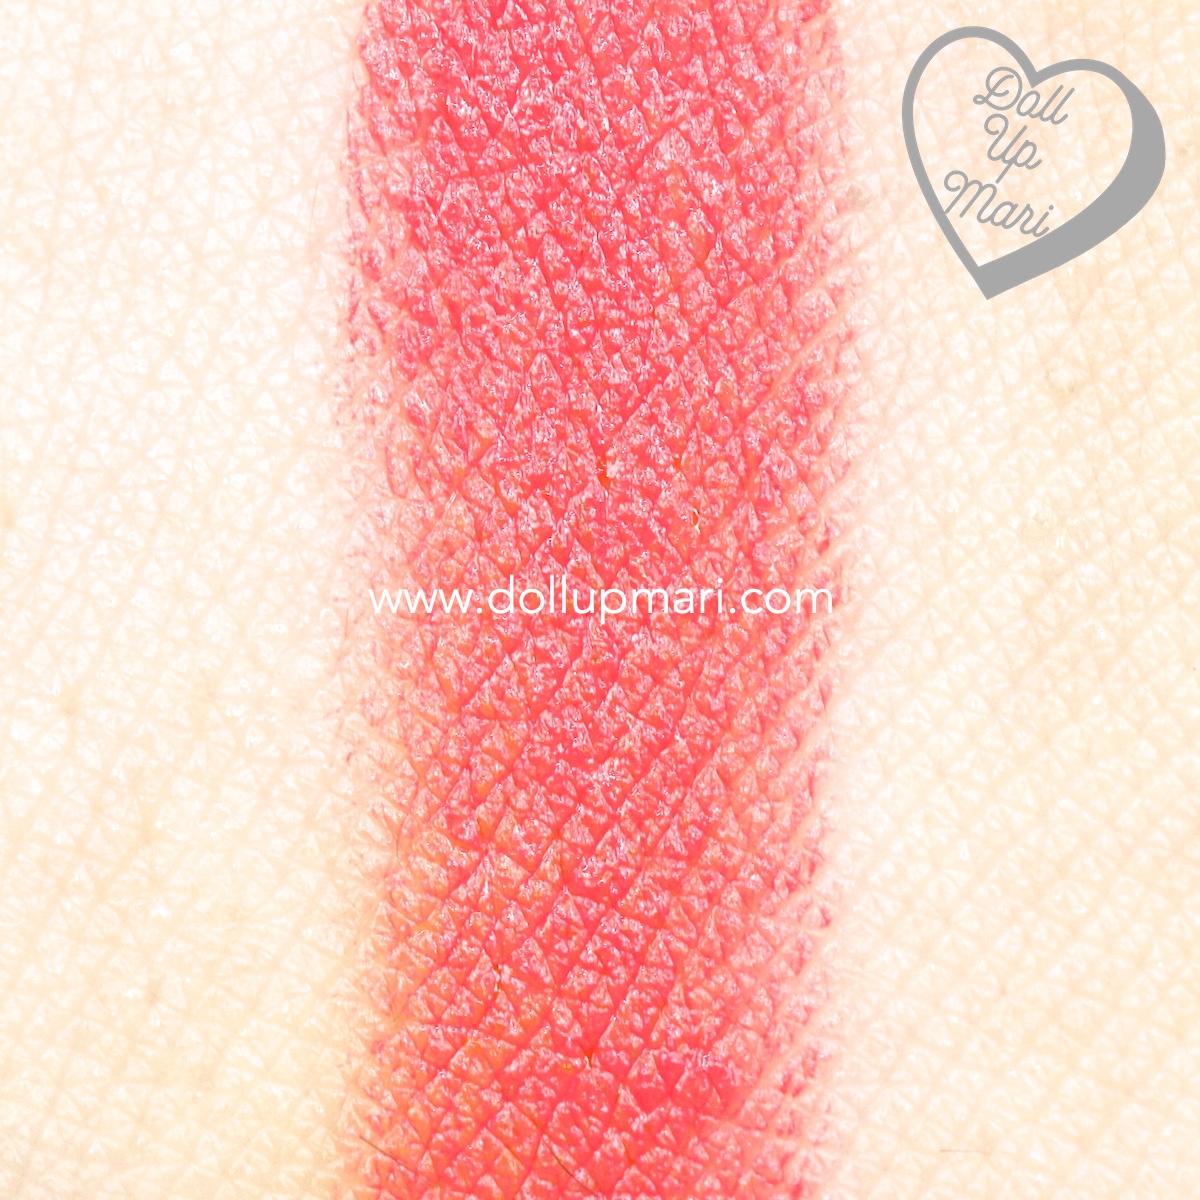 Swatch of Peach Flutters shade of AVON Perfectly Matte Lipstick